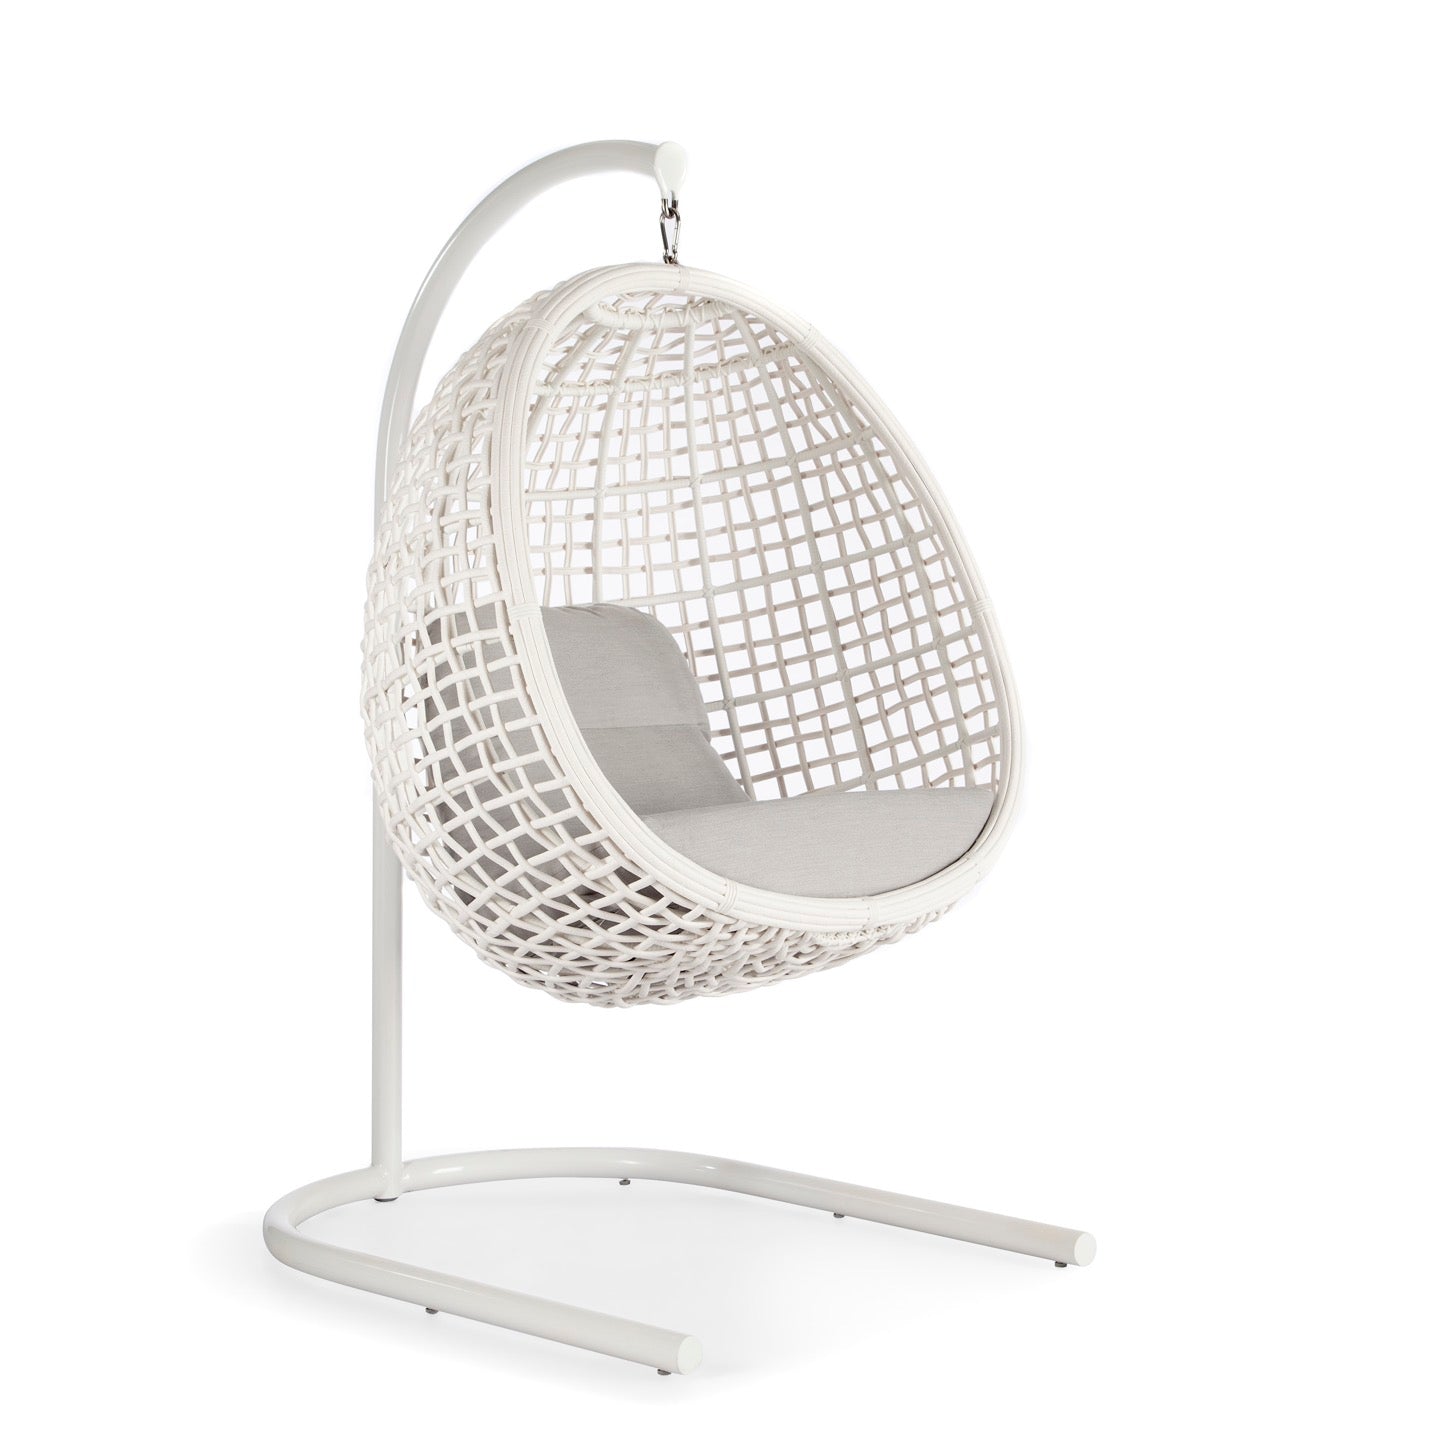 Dynasty Hanging Chair with Stand - Large